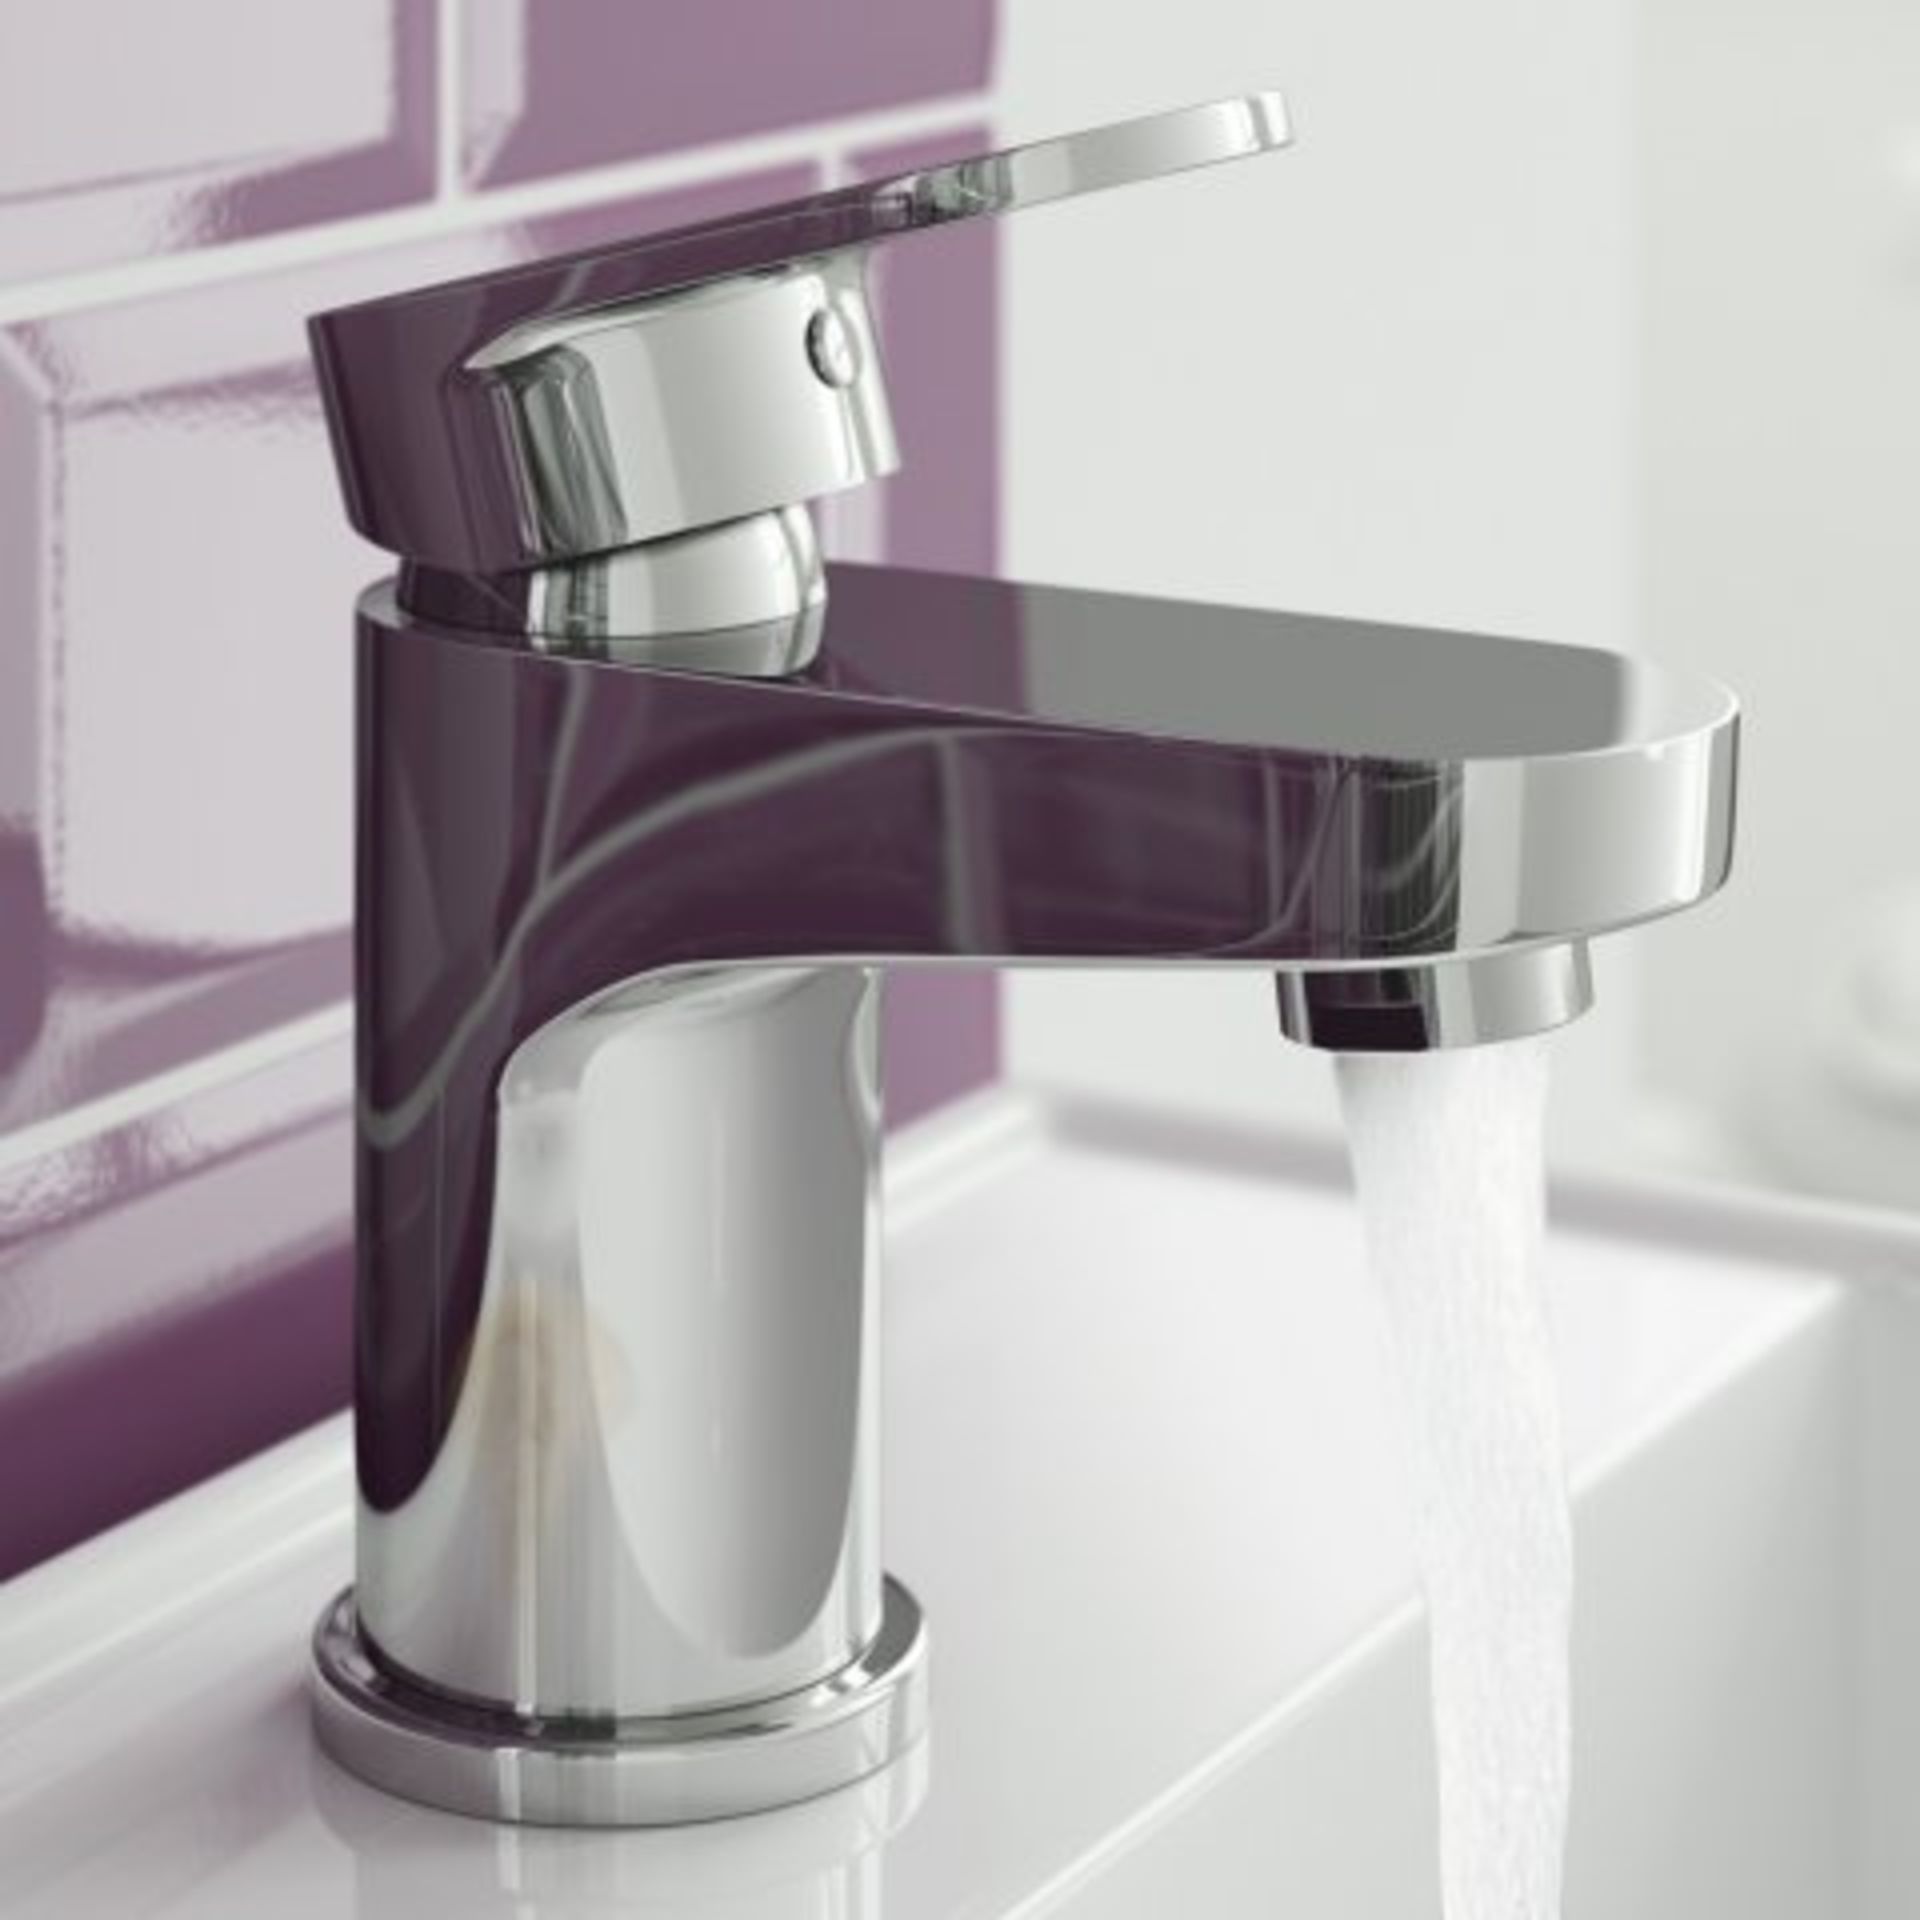 N36 -Boll Mono Basin Mixer Tap - Cloakroom. RRP £77.39. Presenting a contemporary design, this solid